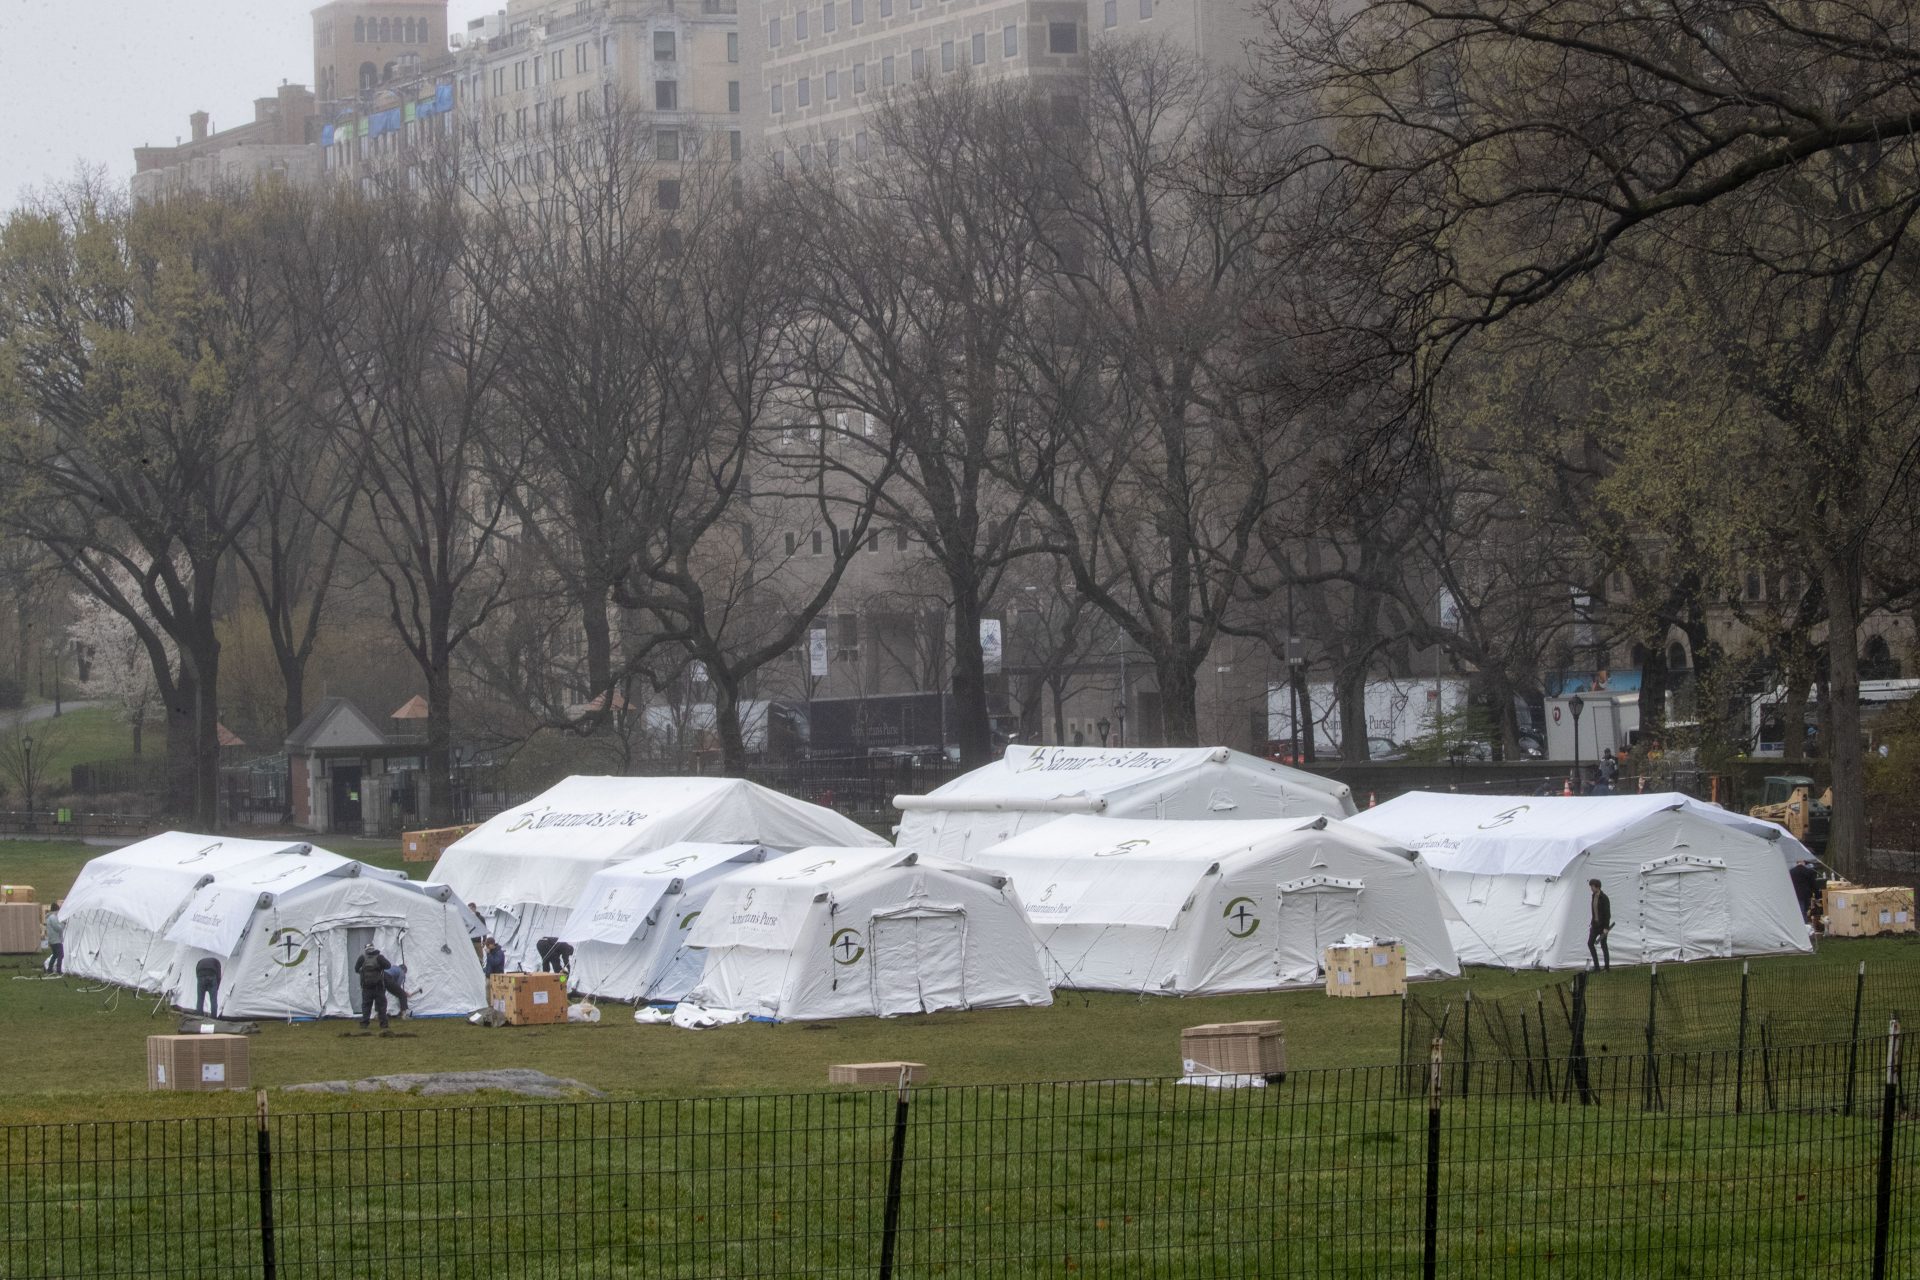 A Samaritan's Purse crew works on building an emergency field hospital specially equipped with a respiratory unit in New York's Central Park across from The Mount Sinai Hospital, Sunday, March 29, 2020.